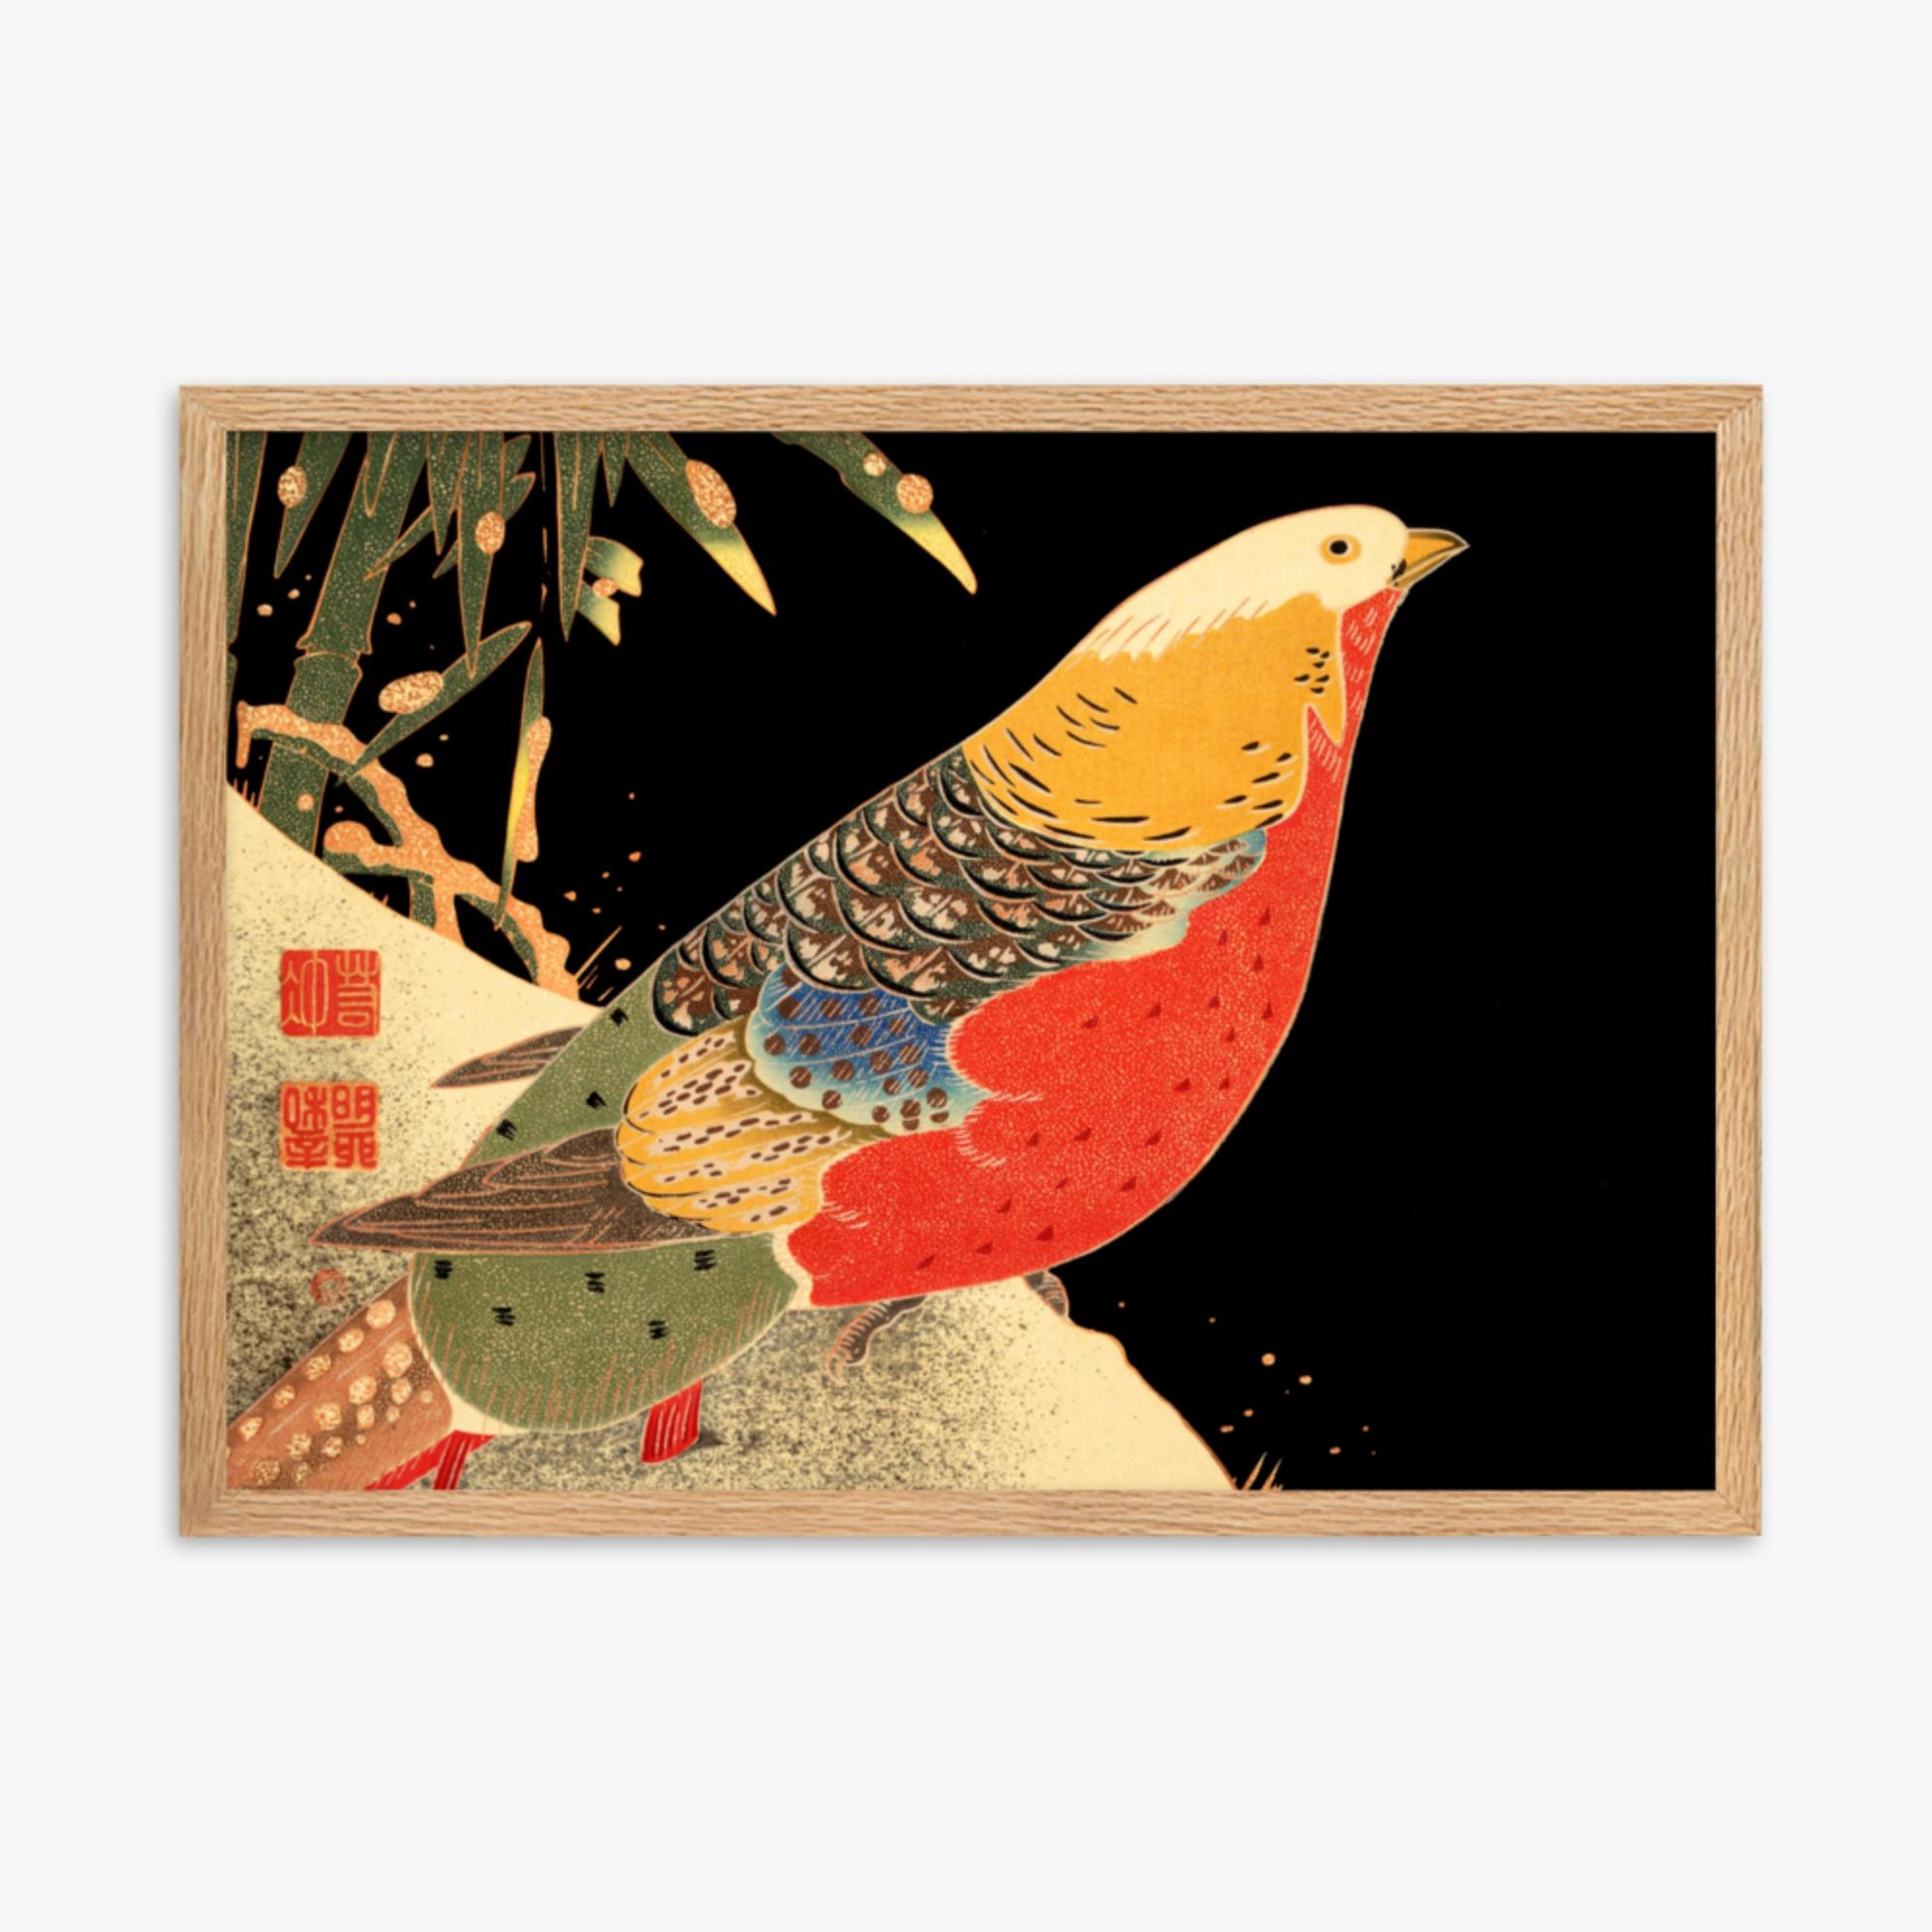 Ito Jakuchu - Golden Pheasant in the Snow 50x70 cm Poster With Oak Frame